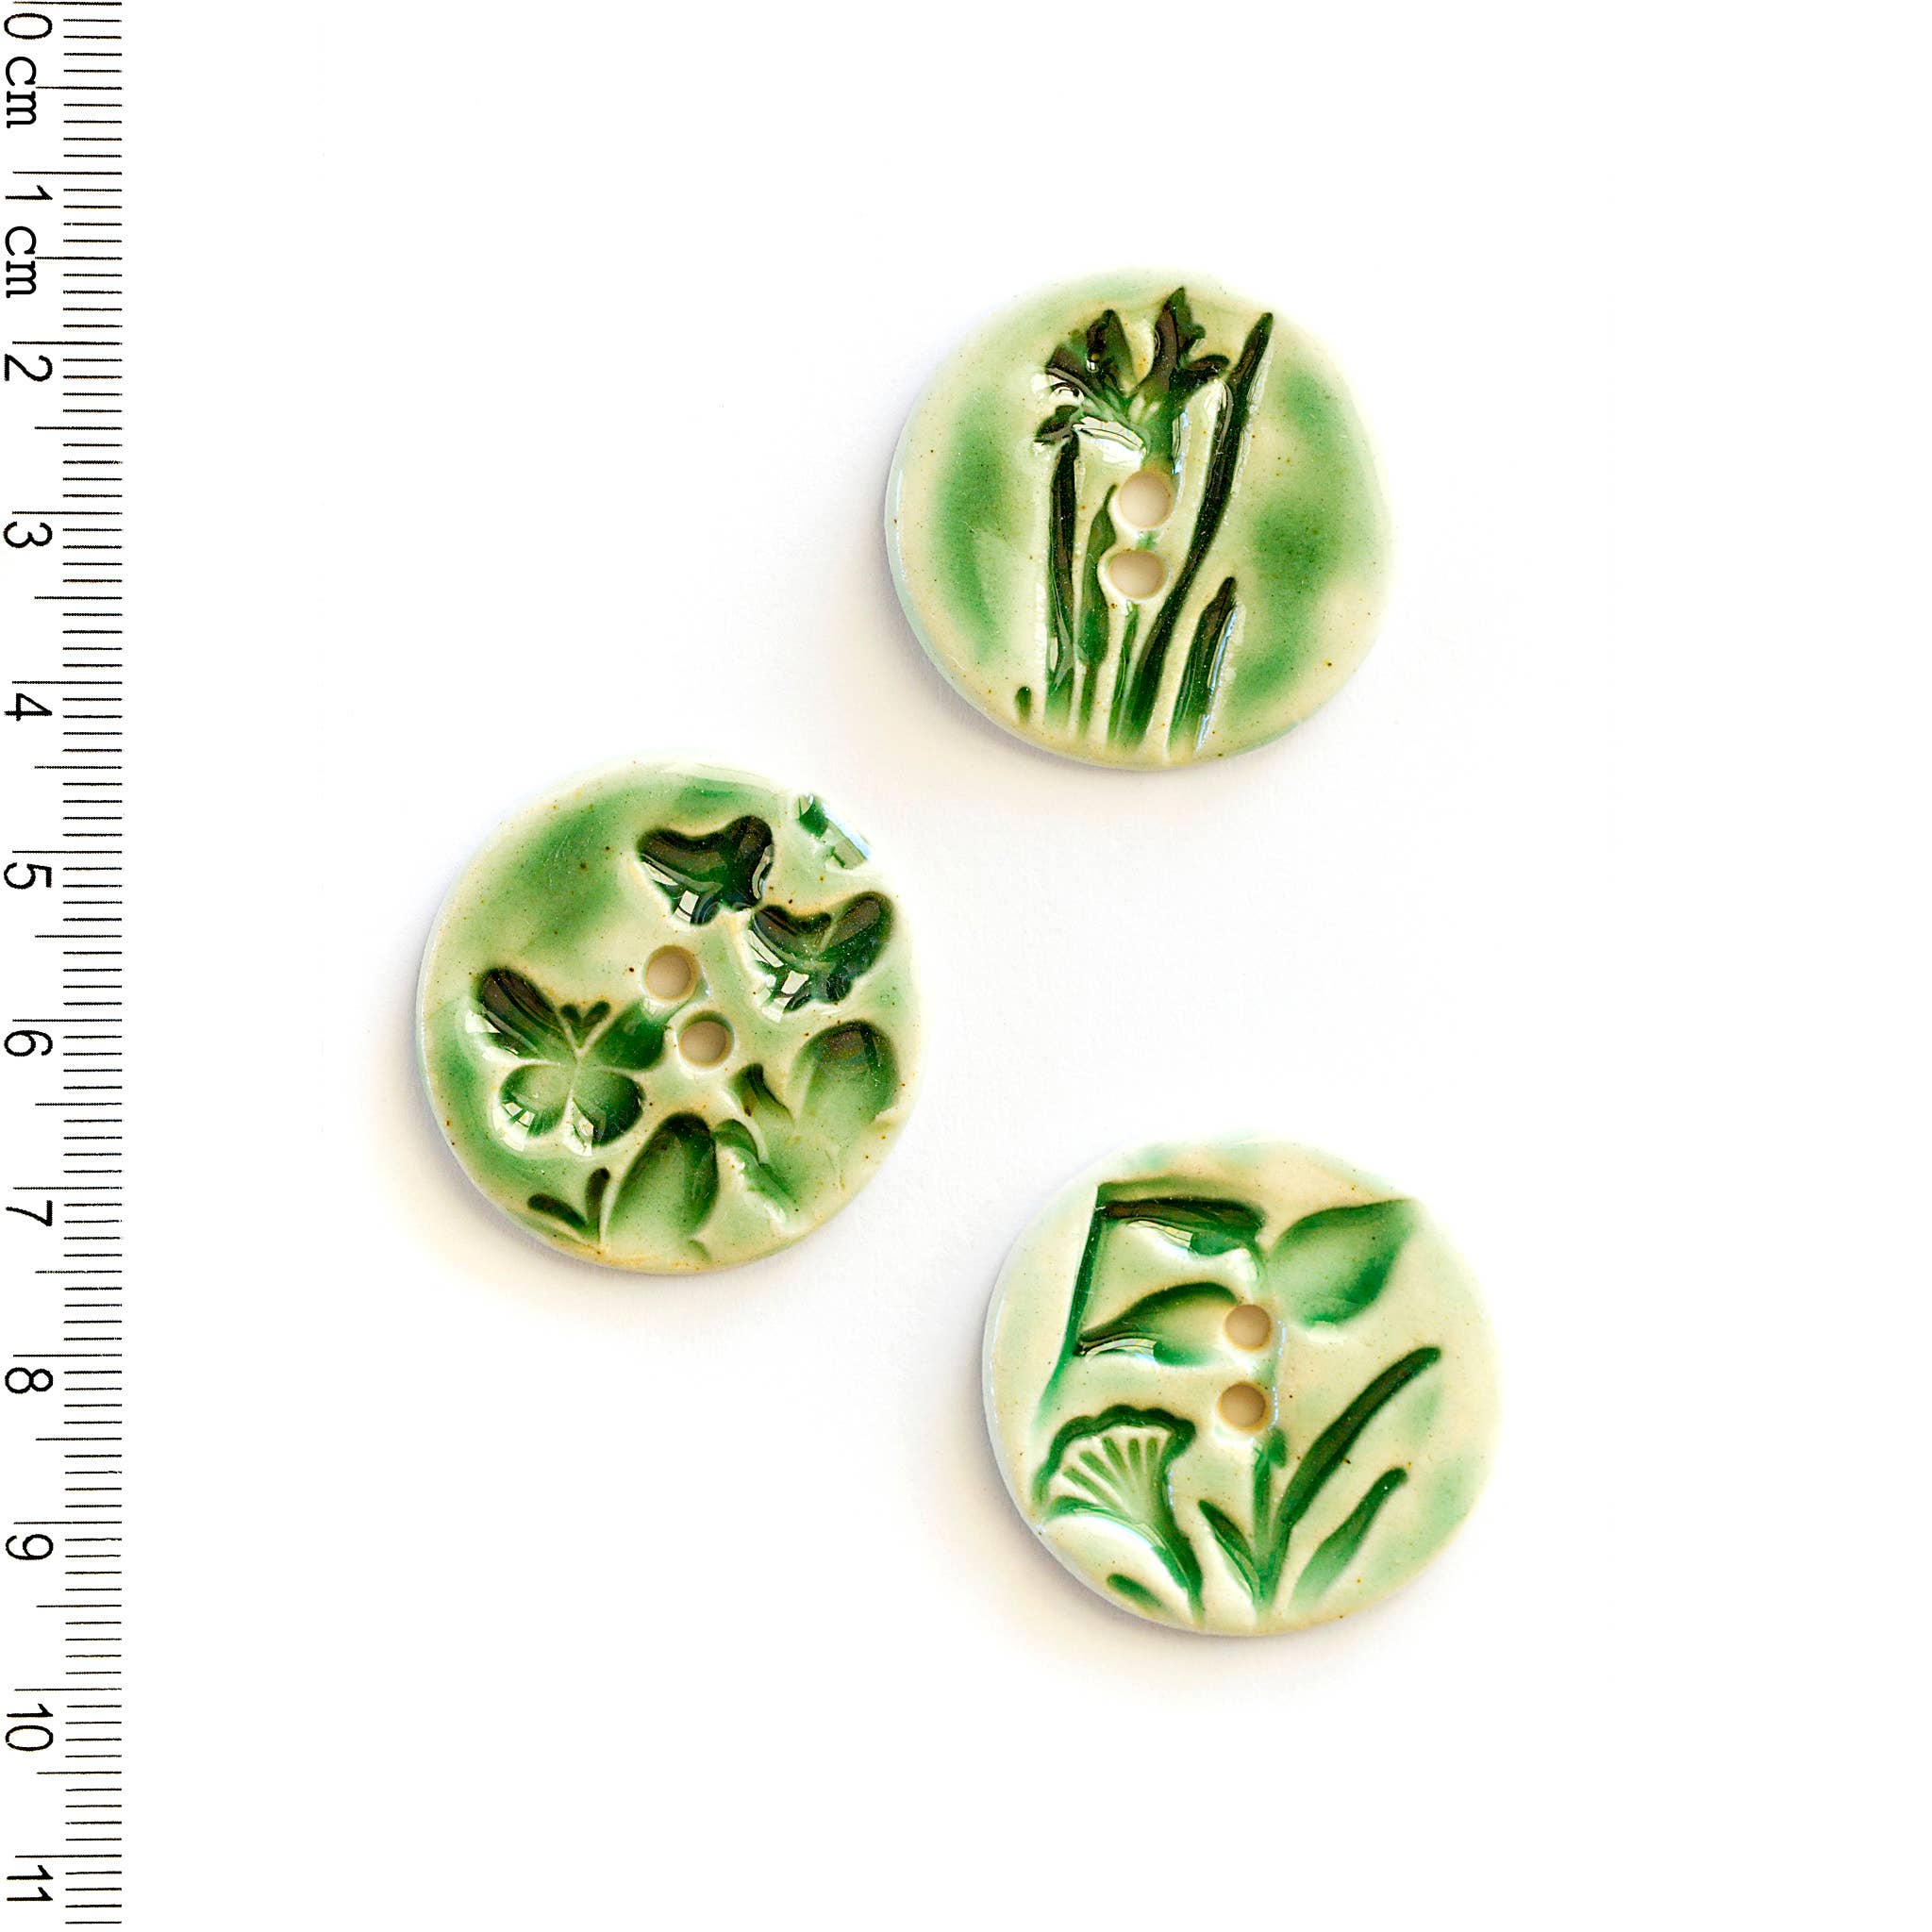 Incomparable Buttons - L501 Botanical Leaf Buttons